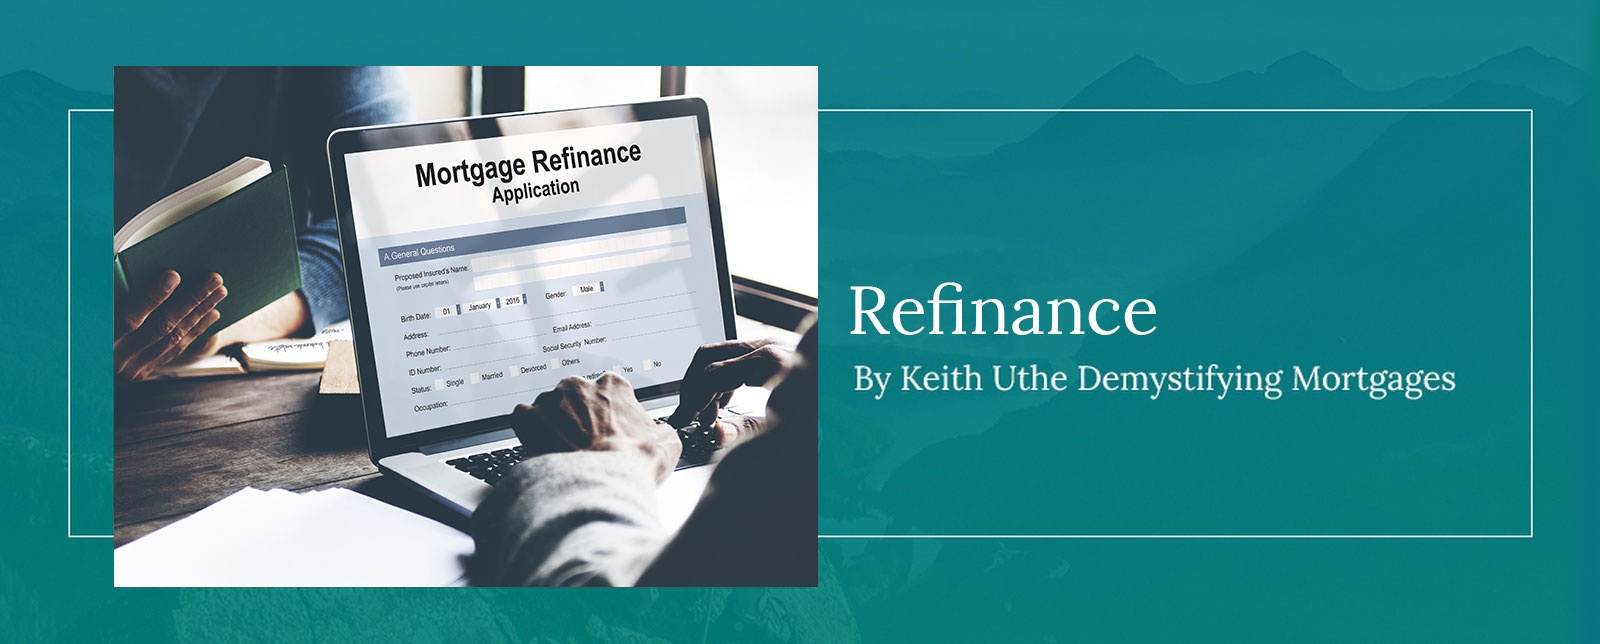 Mortgage Refinance Services in Calgary, Lethbridge, AB by Keith Uthe Demystifying Mortgages